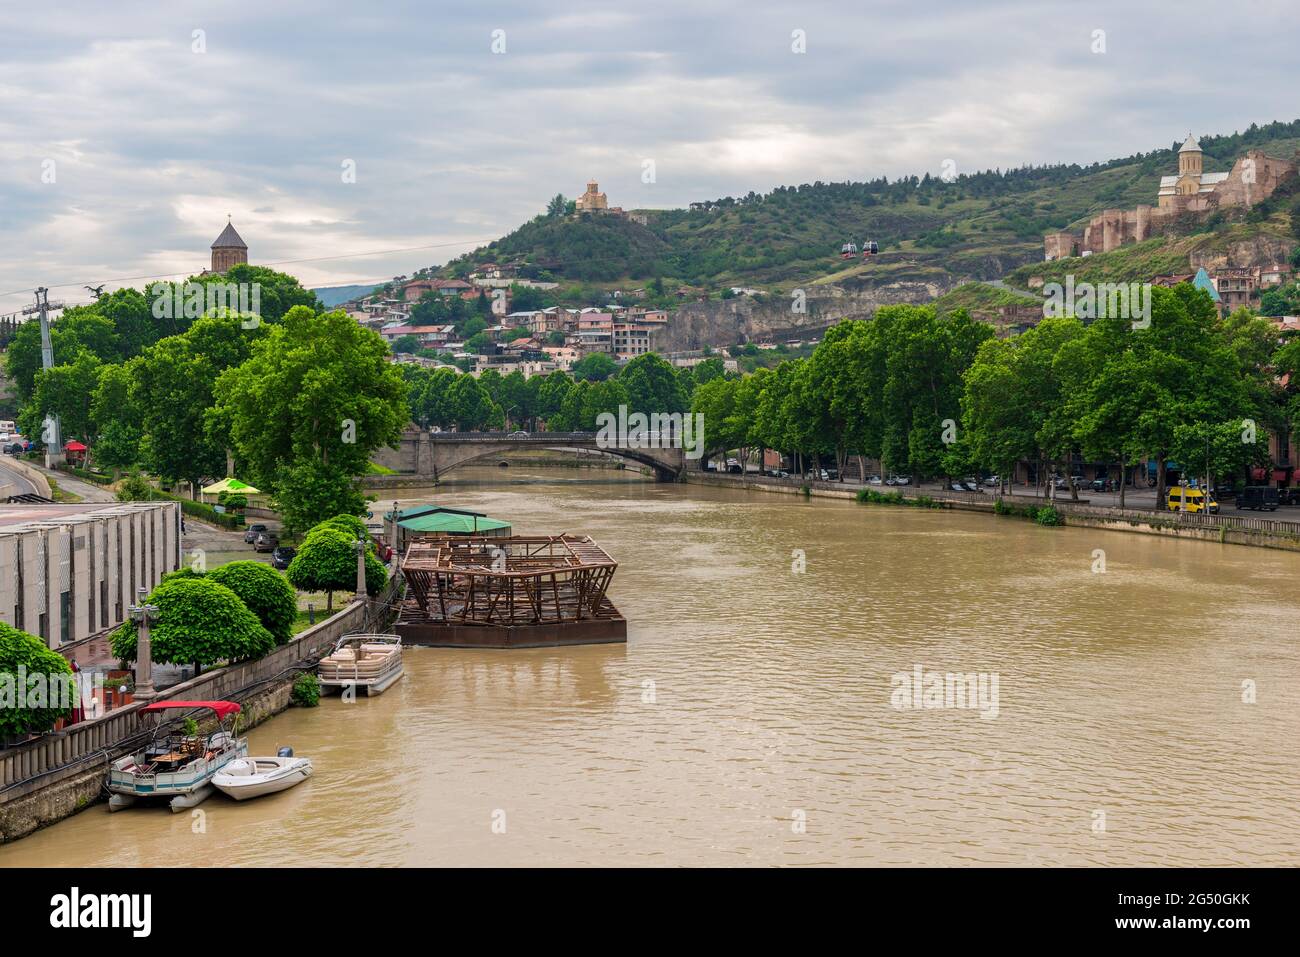 Tbilisi, Georgia. Beautiful picture of Cityscape Of Summer Old Town. Stock Photo